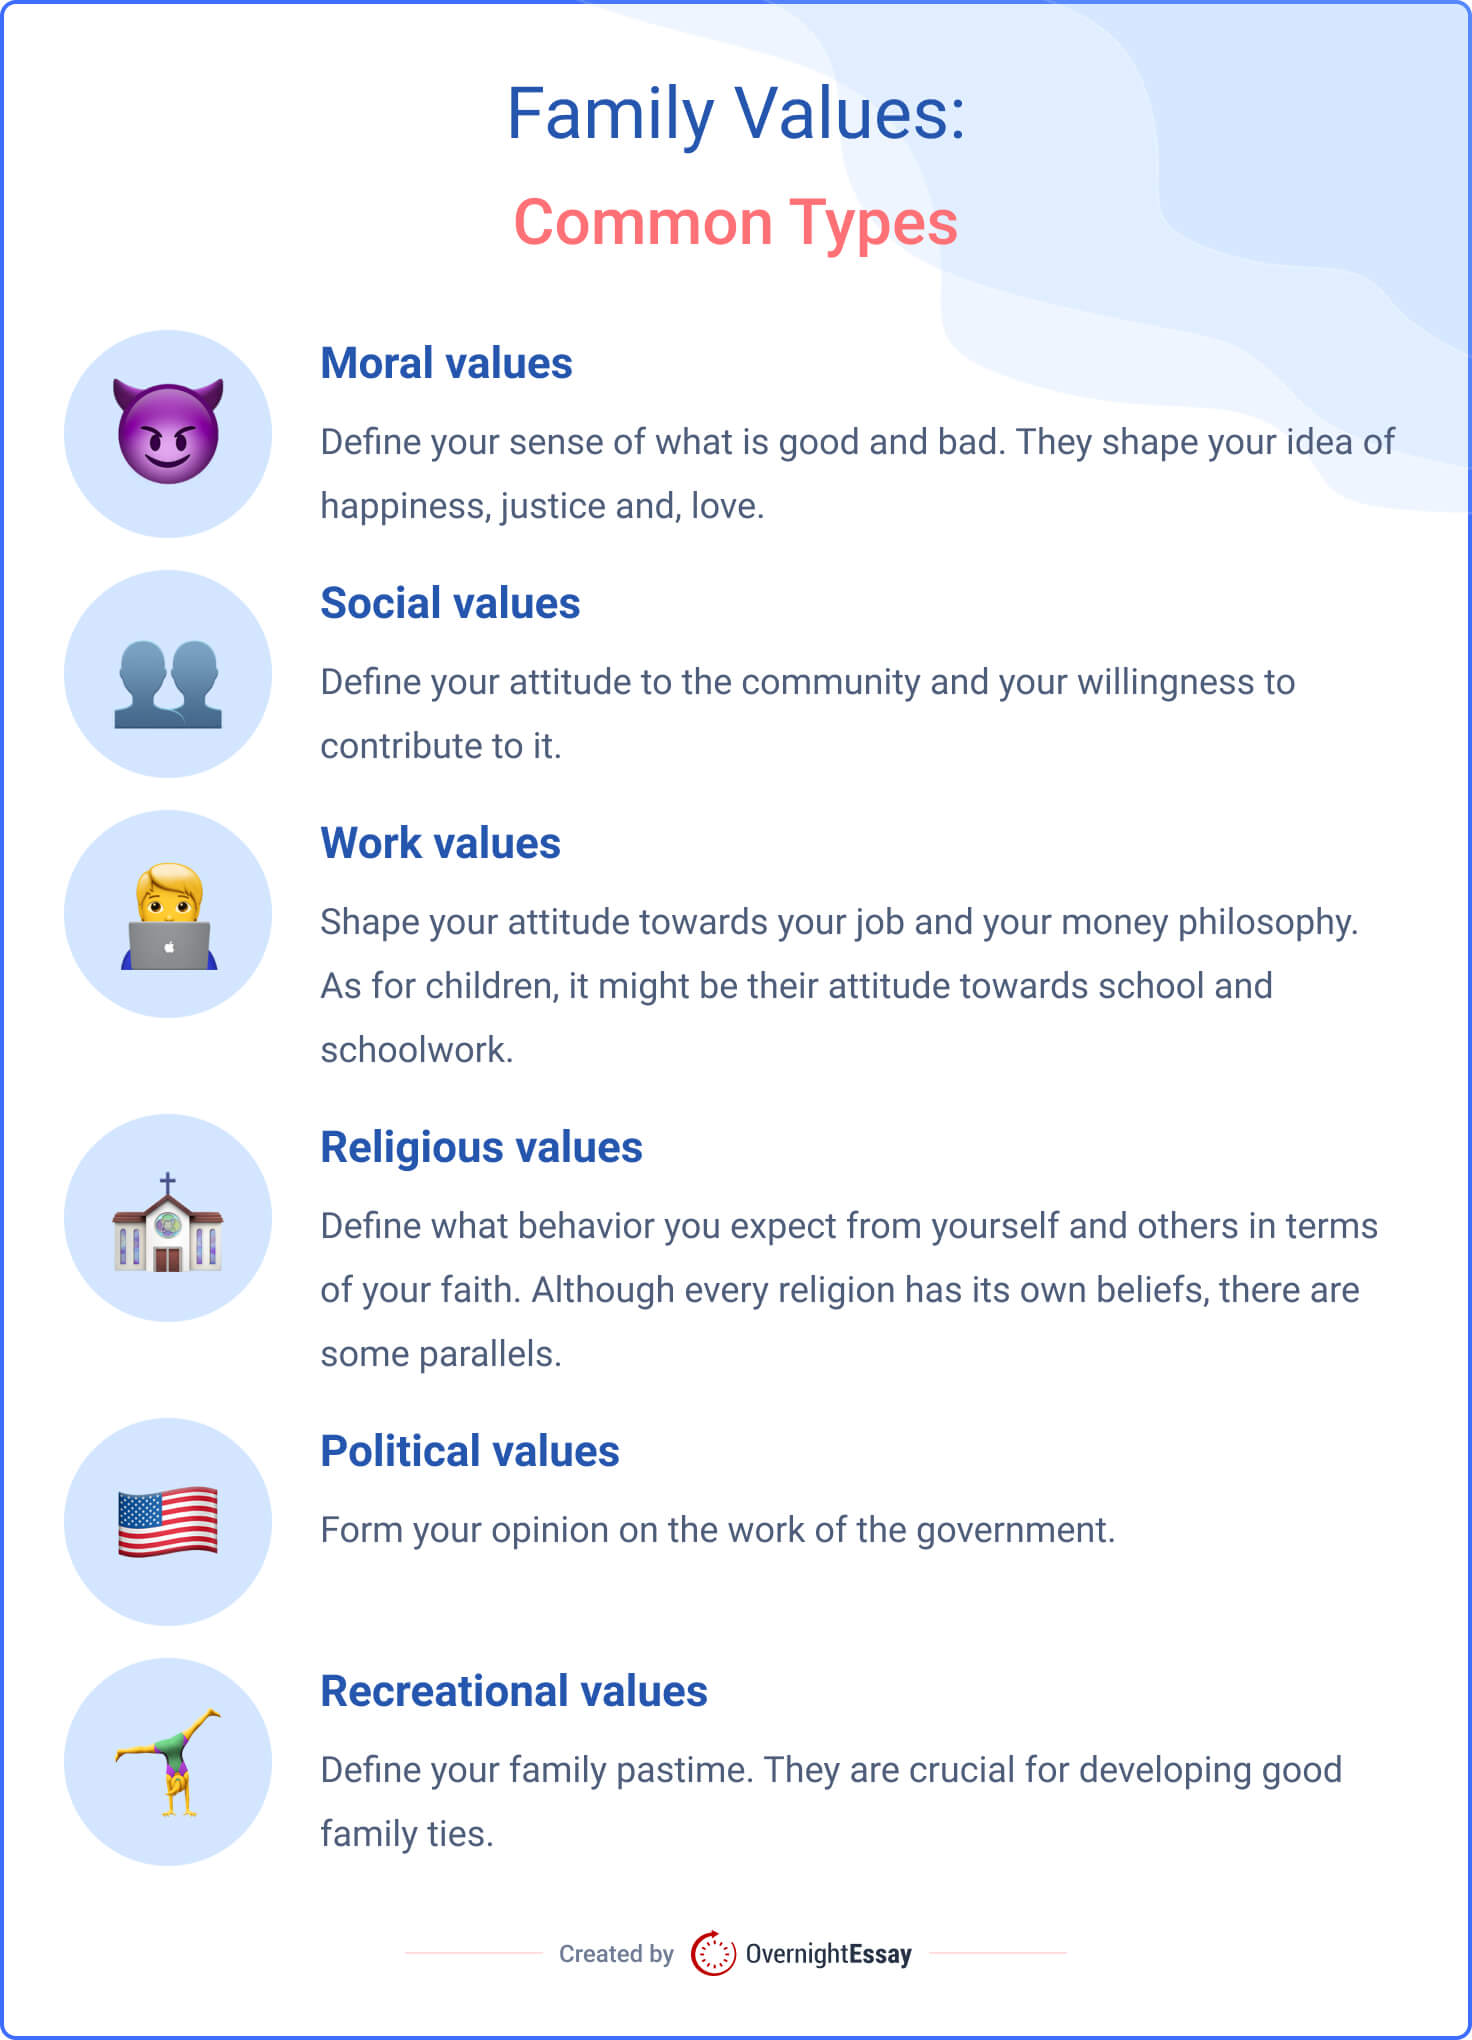 The picture contains a list of 6 most common family values.